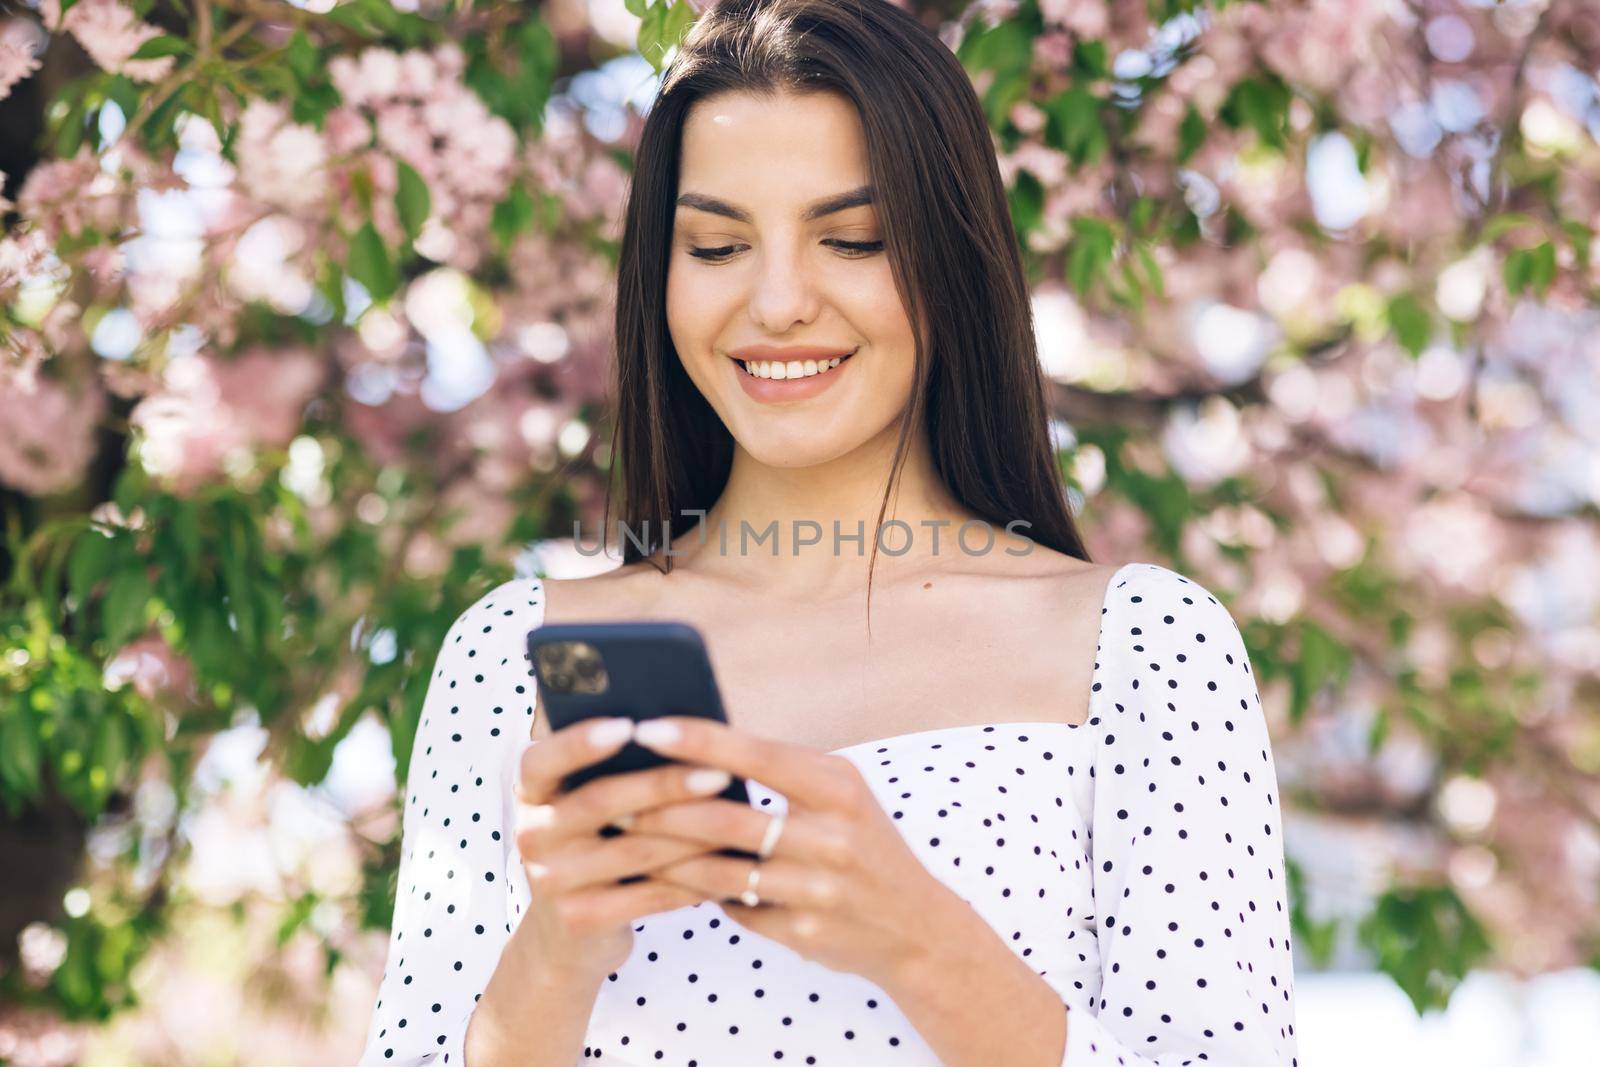 Smiling woman walks down the central park city street and uses her phone. Pretty summer woman in white dress walks down the street looking at her mobile phone by uflypro